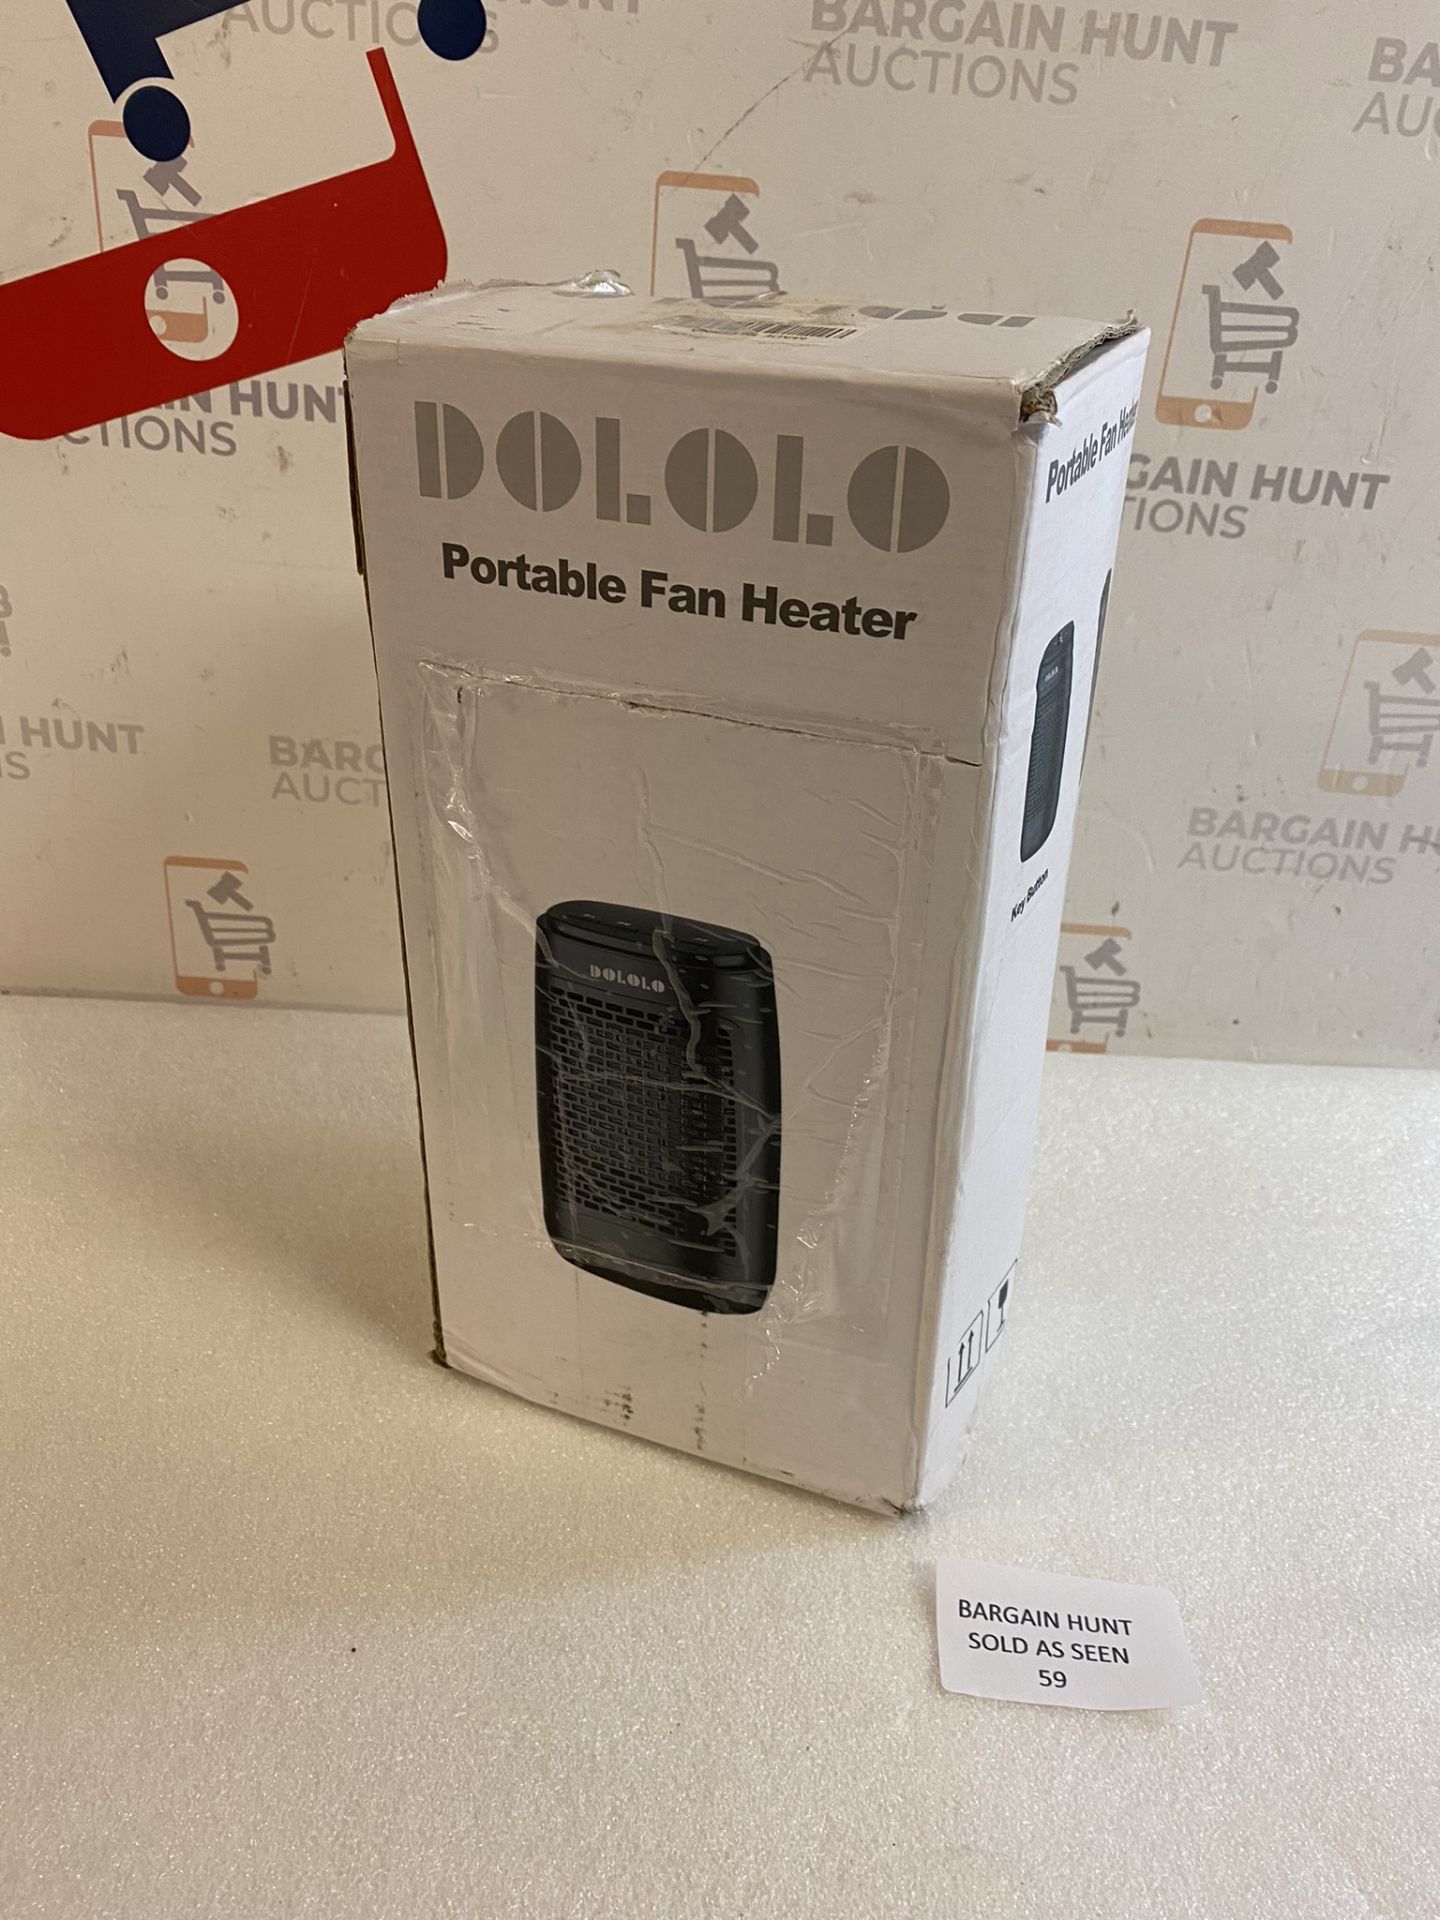 Dololo Electric Fan Heater Portable Ceramic Oscillating Space Heater RRP £25.99 - Image 2 of 2